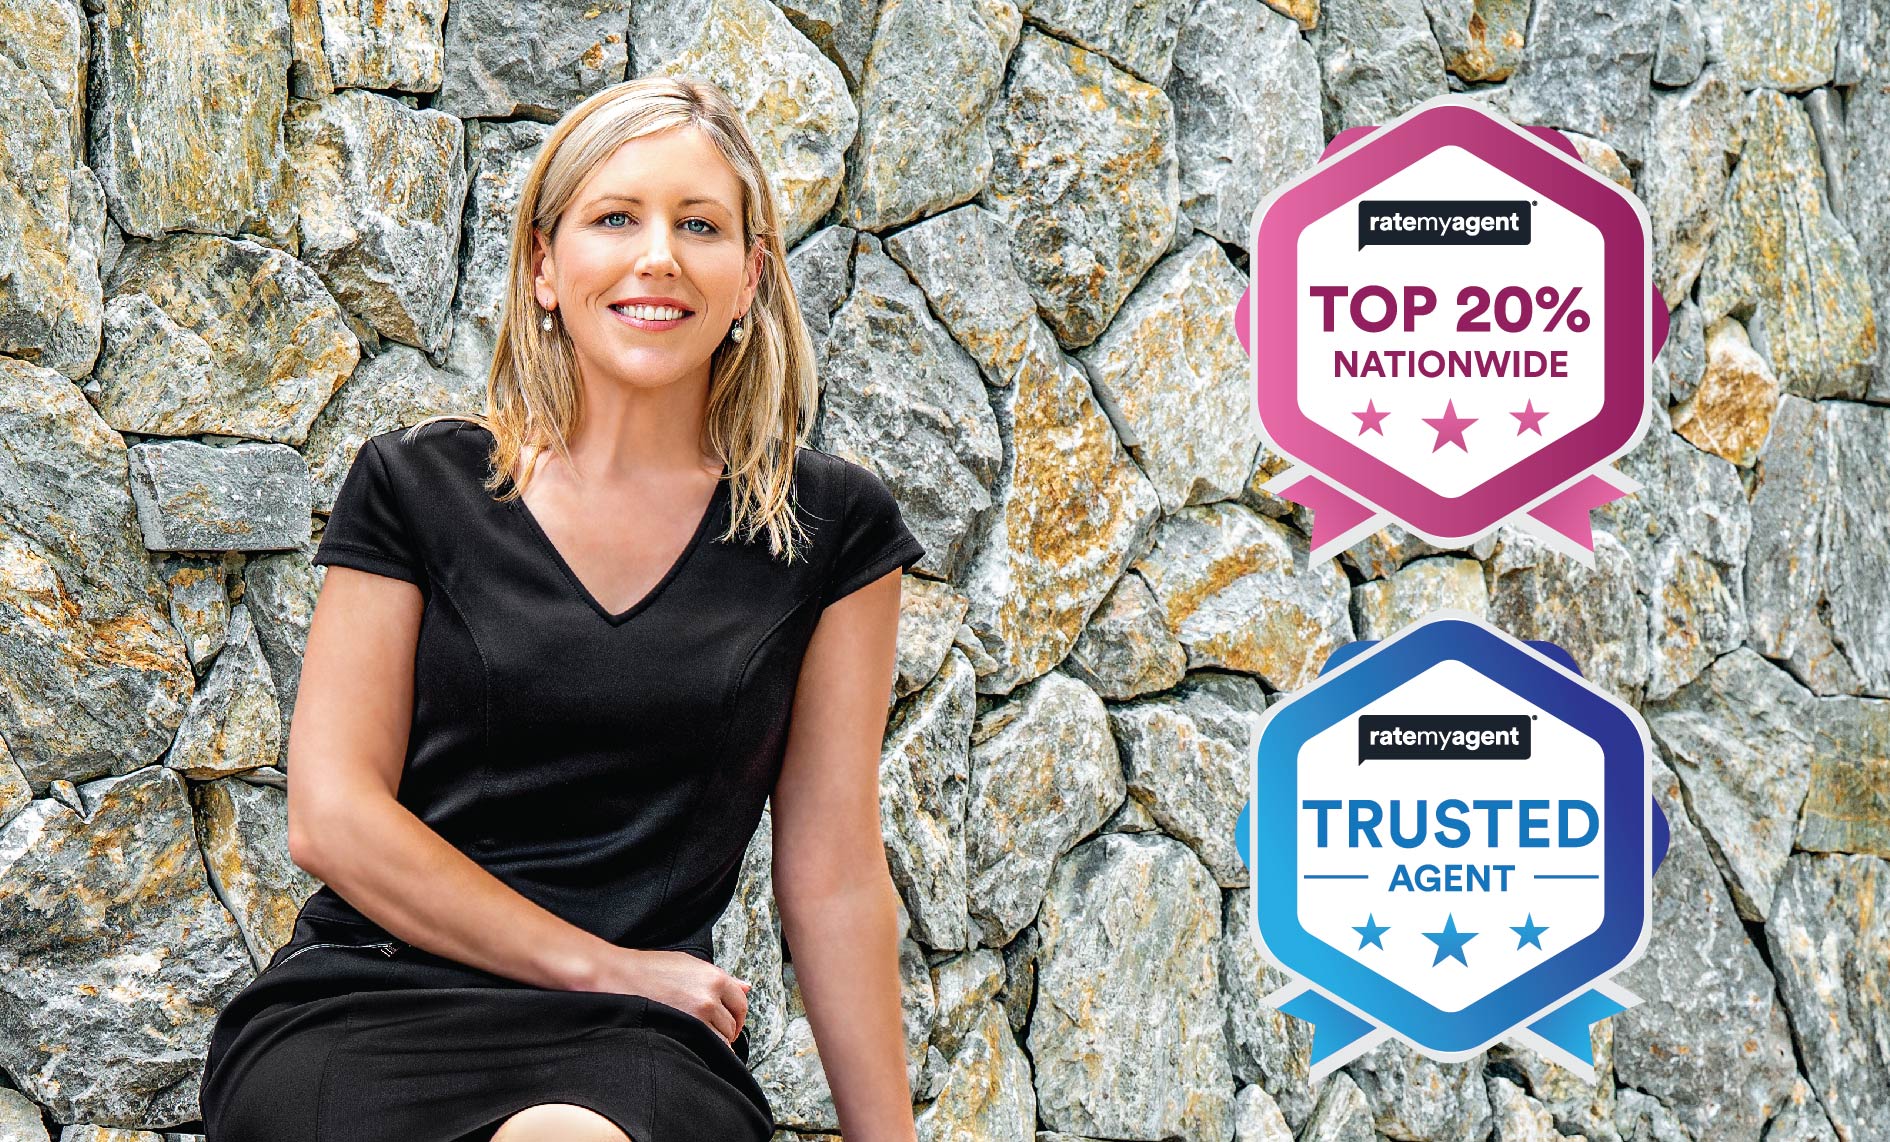 Gemma Coady wins RateMyAgent RMA Awards Top 20% Nationwide and Trusted Agent